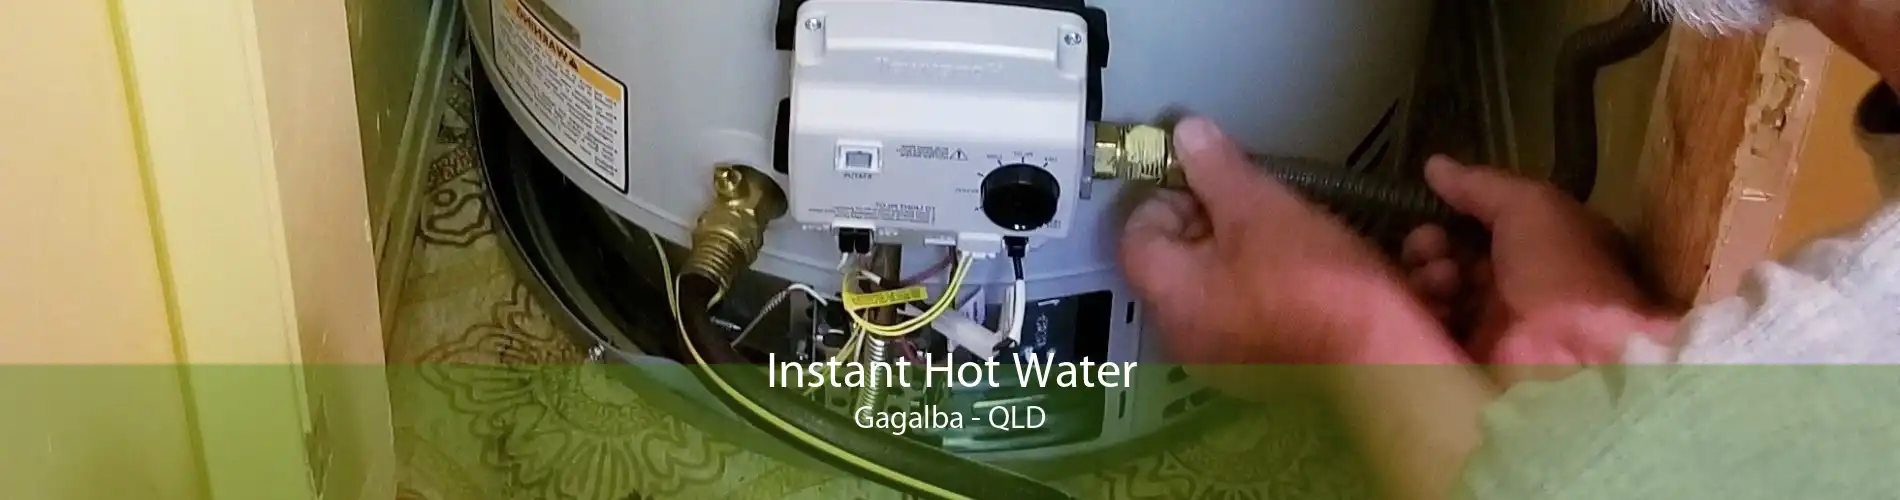 Instant Hot Water Gagalba - QLD